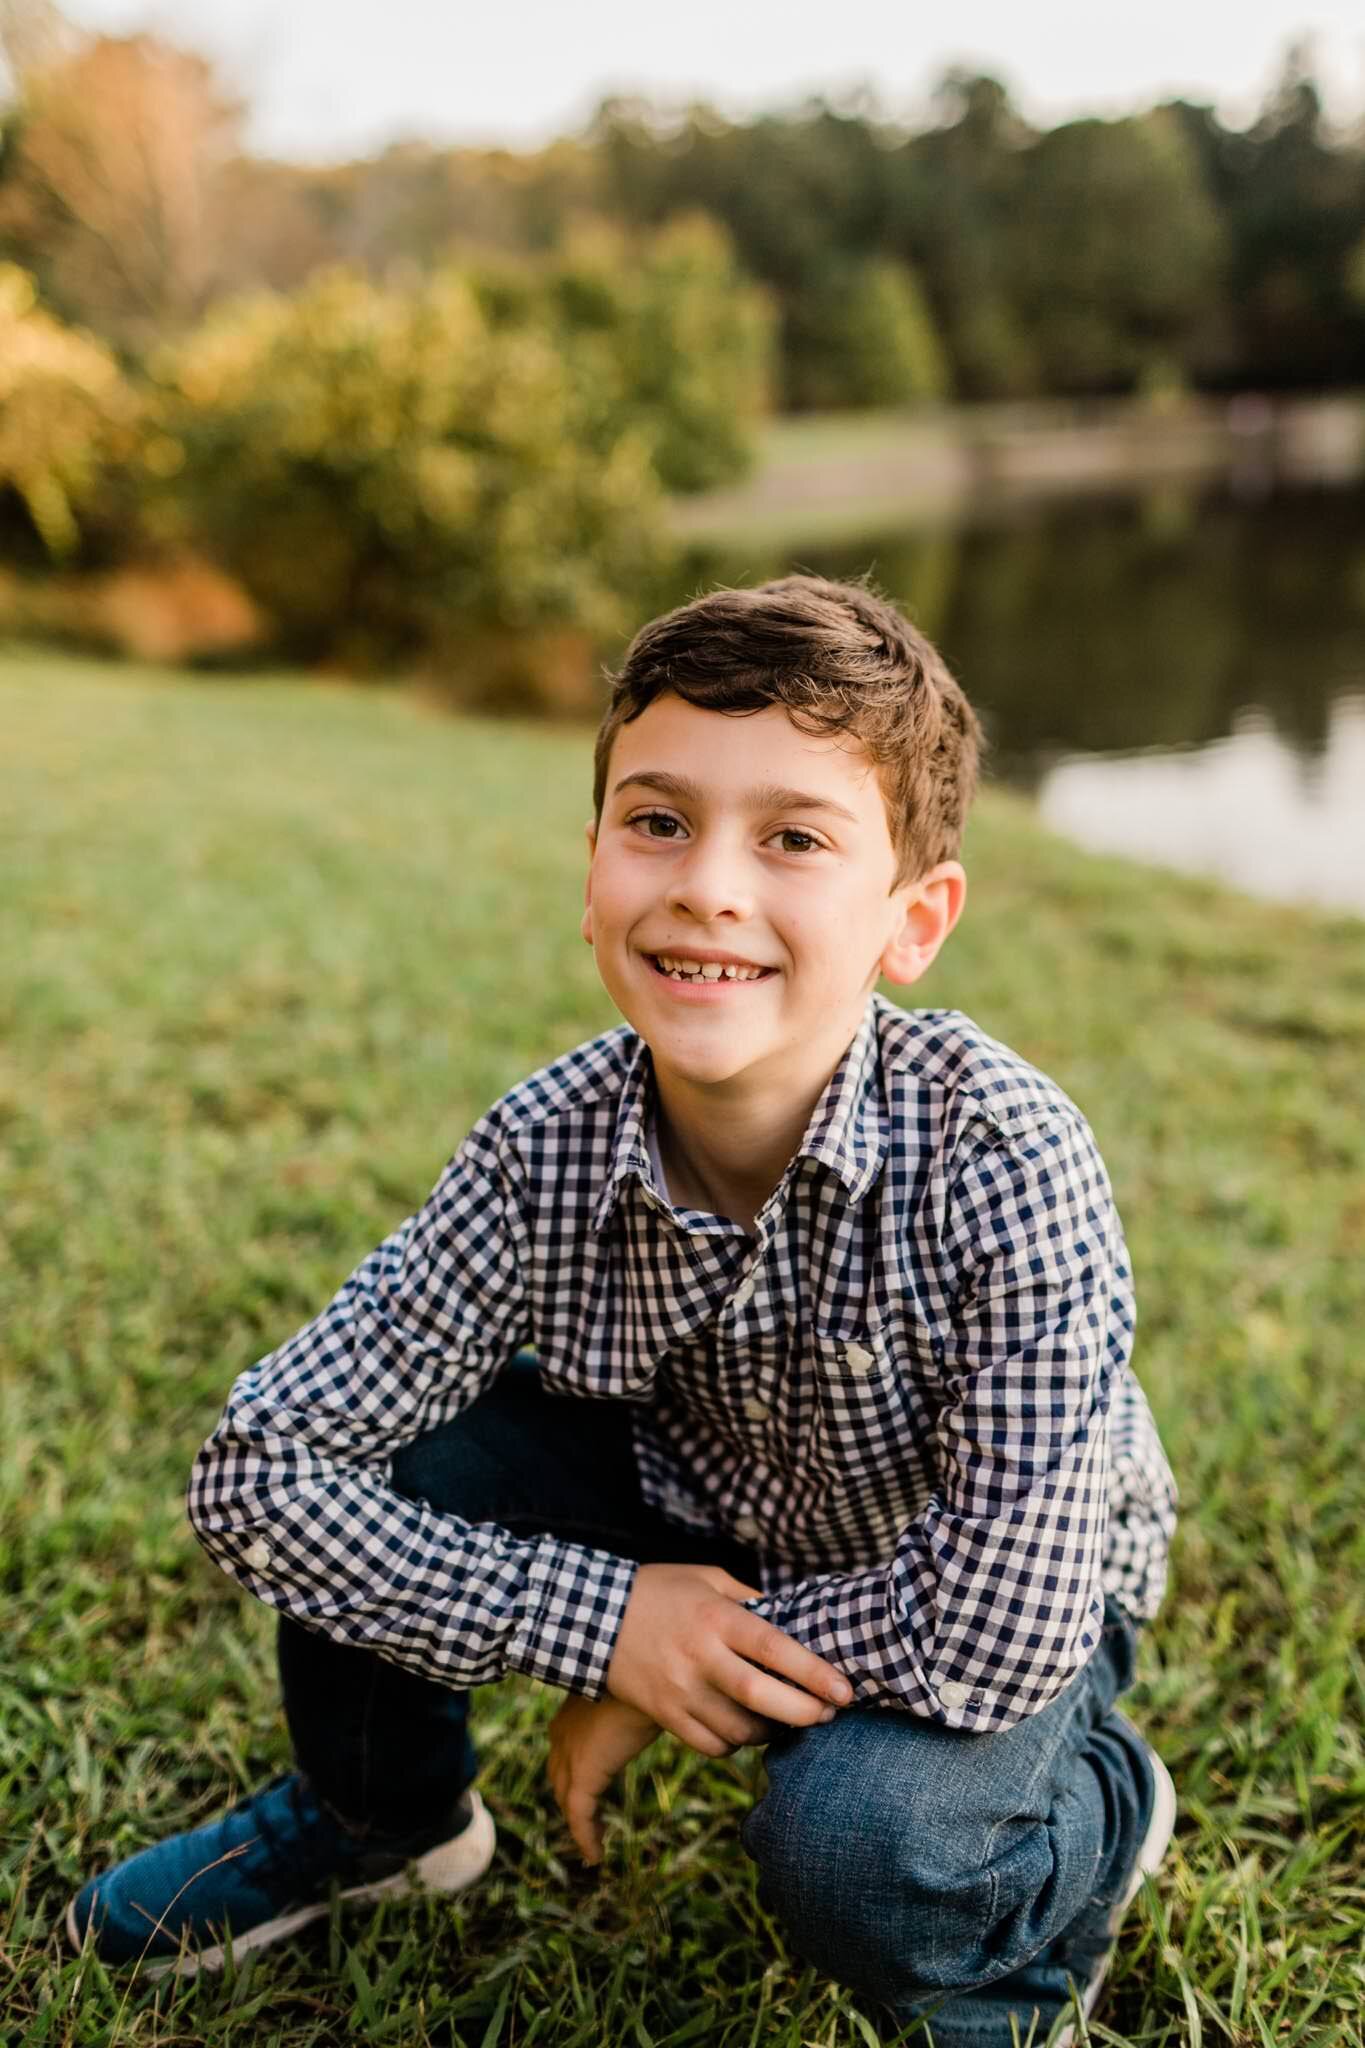 Raleigh Family Photographer | By G. Lin Photography | Umstead Park | Young boy smiling and sitting outside